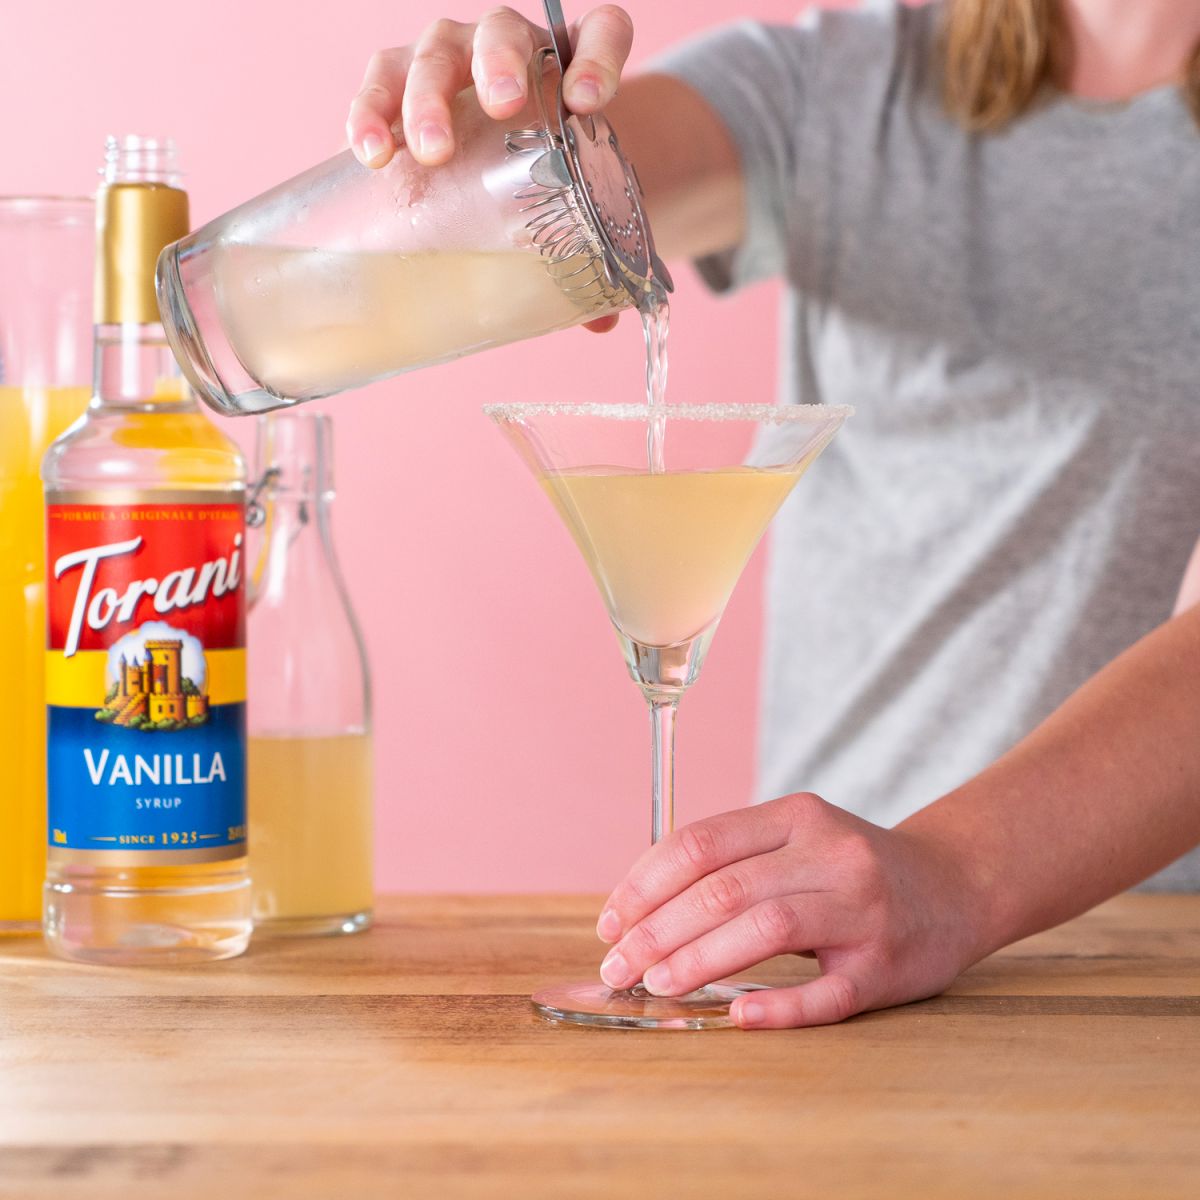 torani syrup bottle with a candied lemon drop being poured from shaker into a coupe